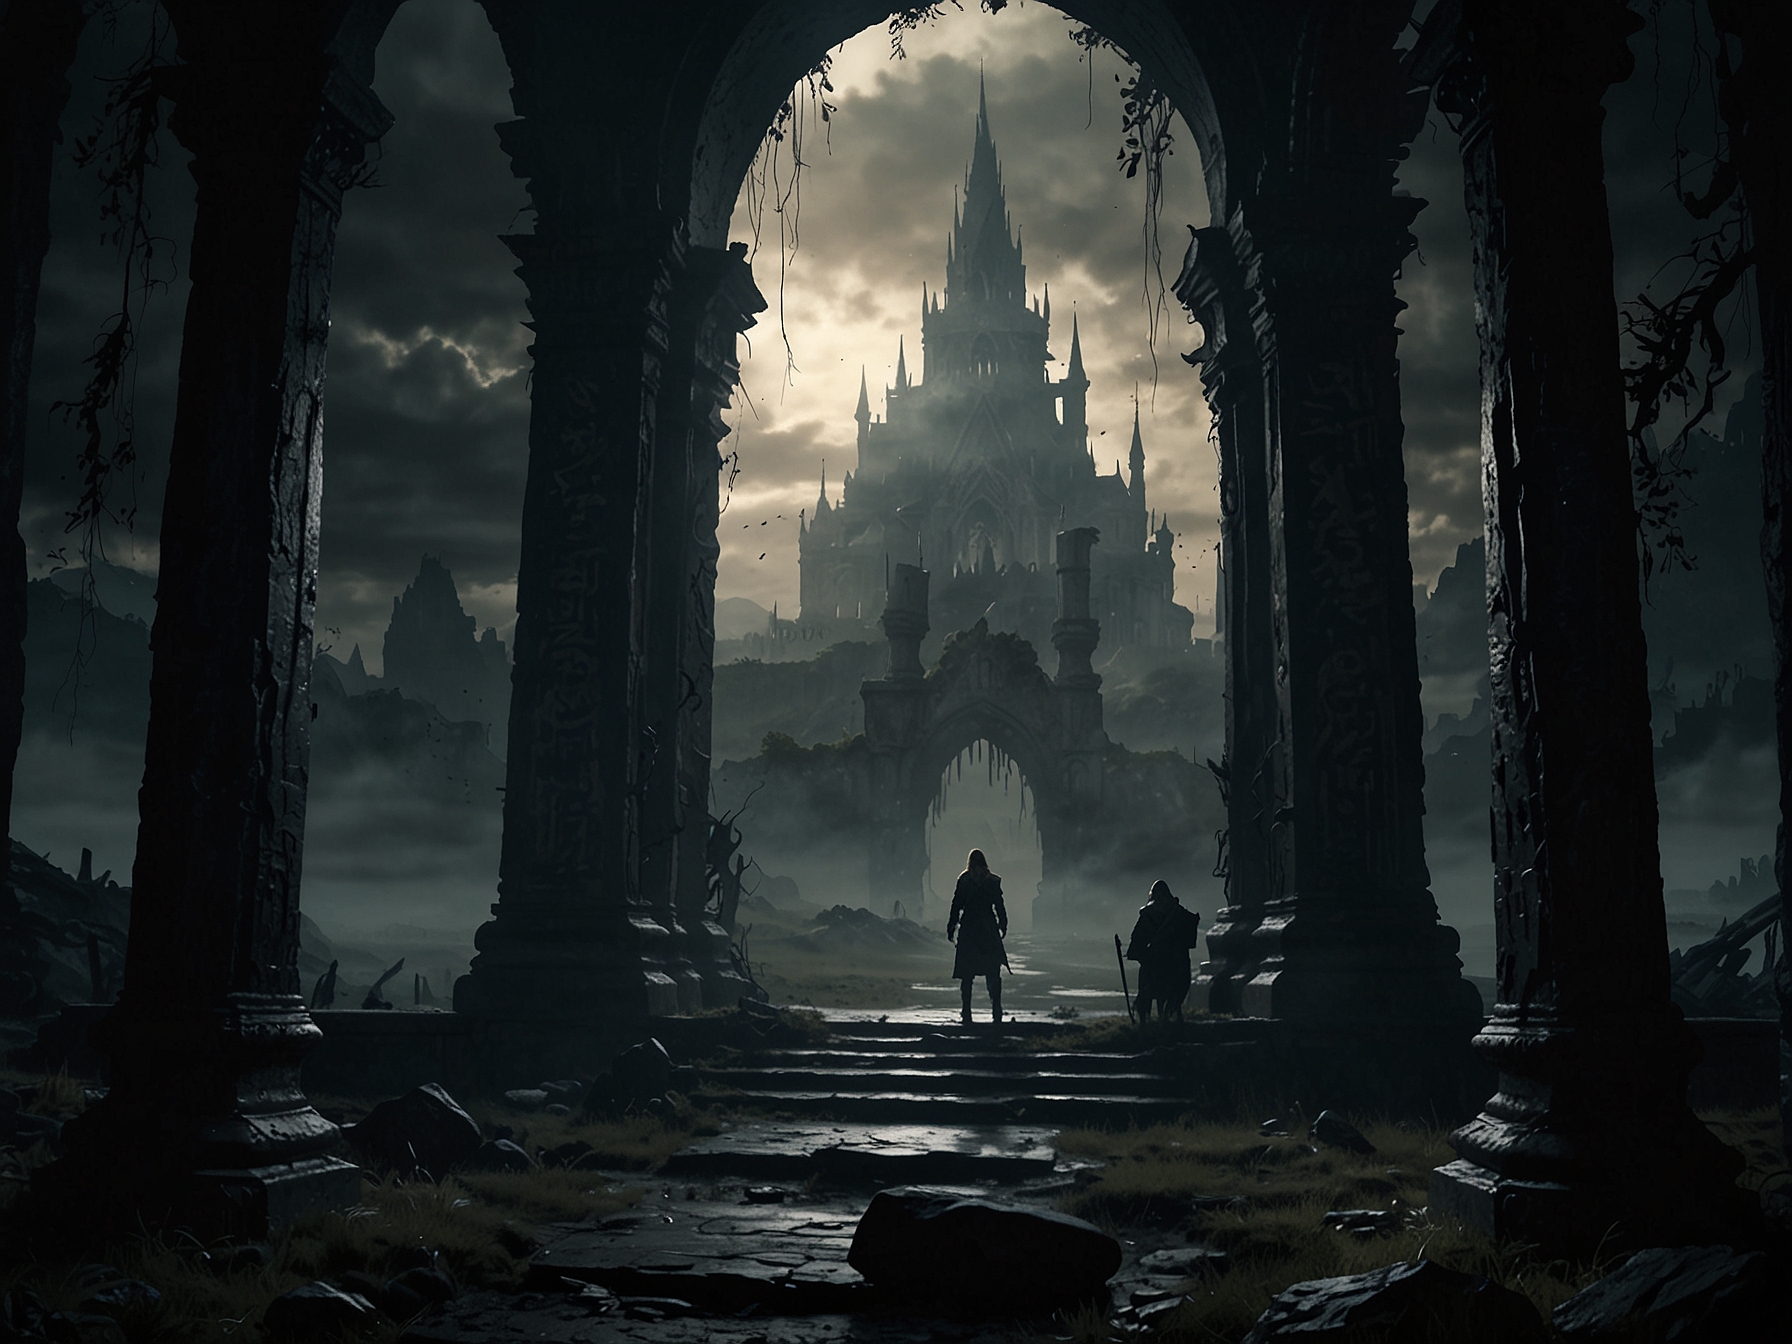 A cinematic poster-style image showing a scene from Elden Ring, depicting its dark and elaborate fantasy world, hinting at the rich visual potential for a movie adaptation.